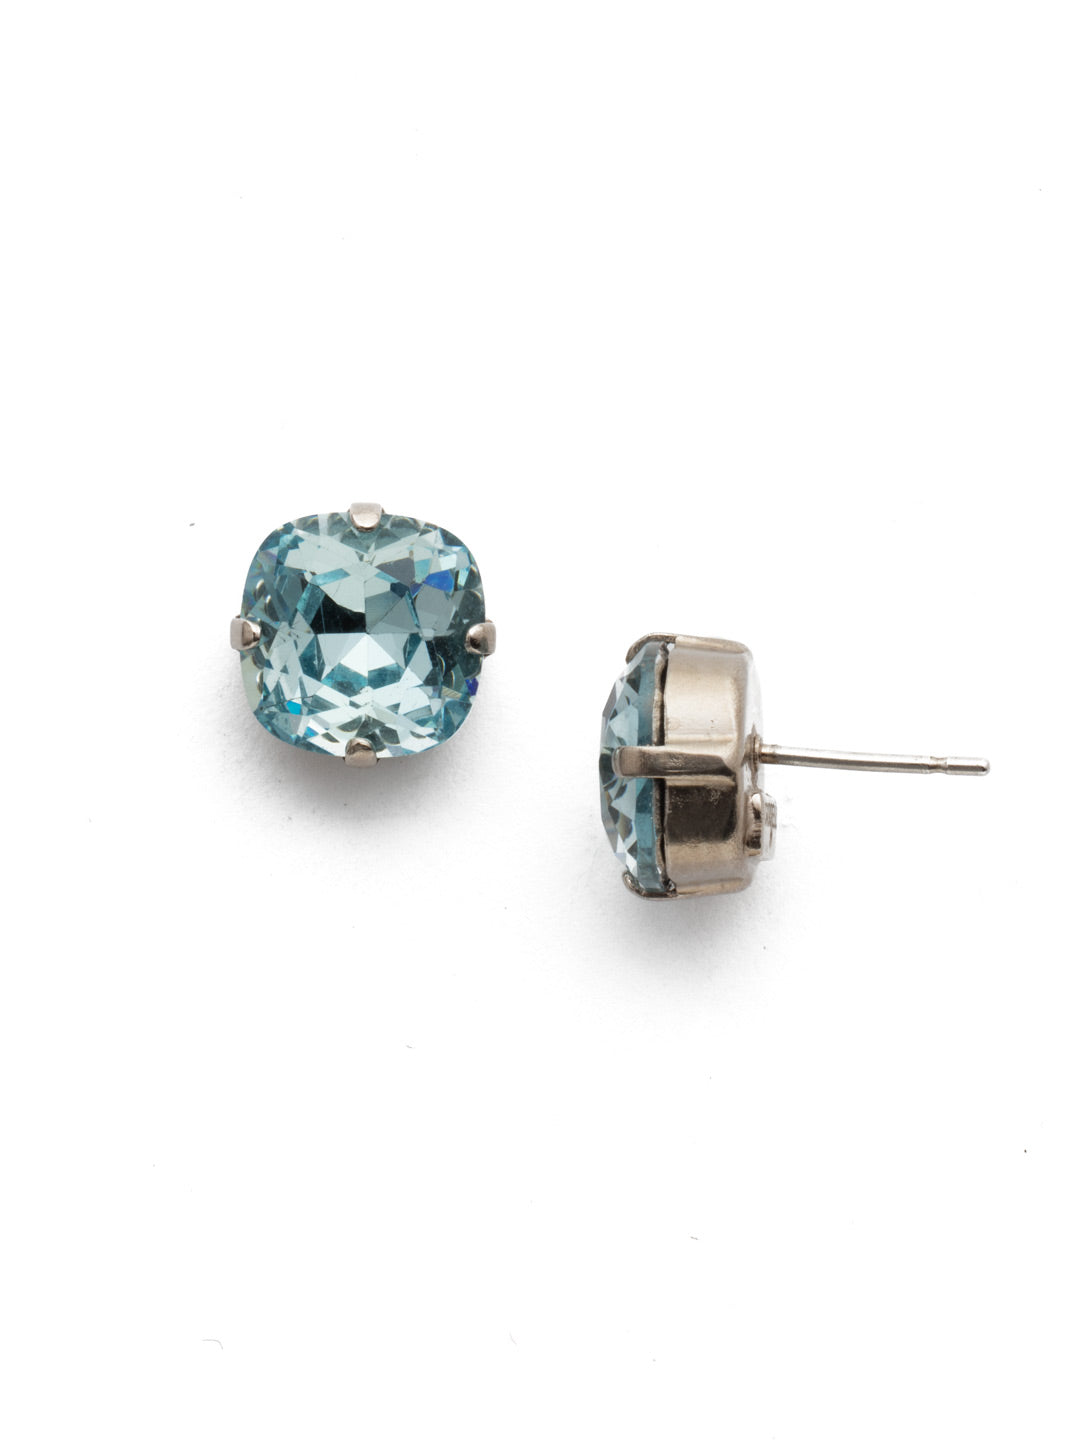 Halcyon Stud Earrings - EDH25ASLAQ - <p>A beautiful, luminous cushion-cut crystal in a classic four-pronged setting that's ideal for everyday wear. From Sorrelli's Light Aqua collection in our Antique Silver-tone finish.</p>